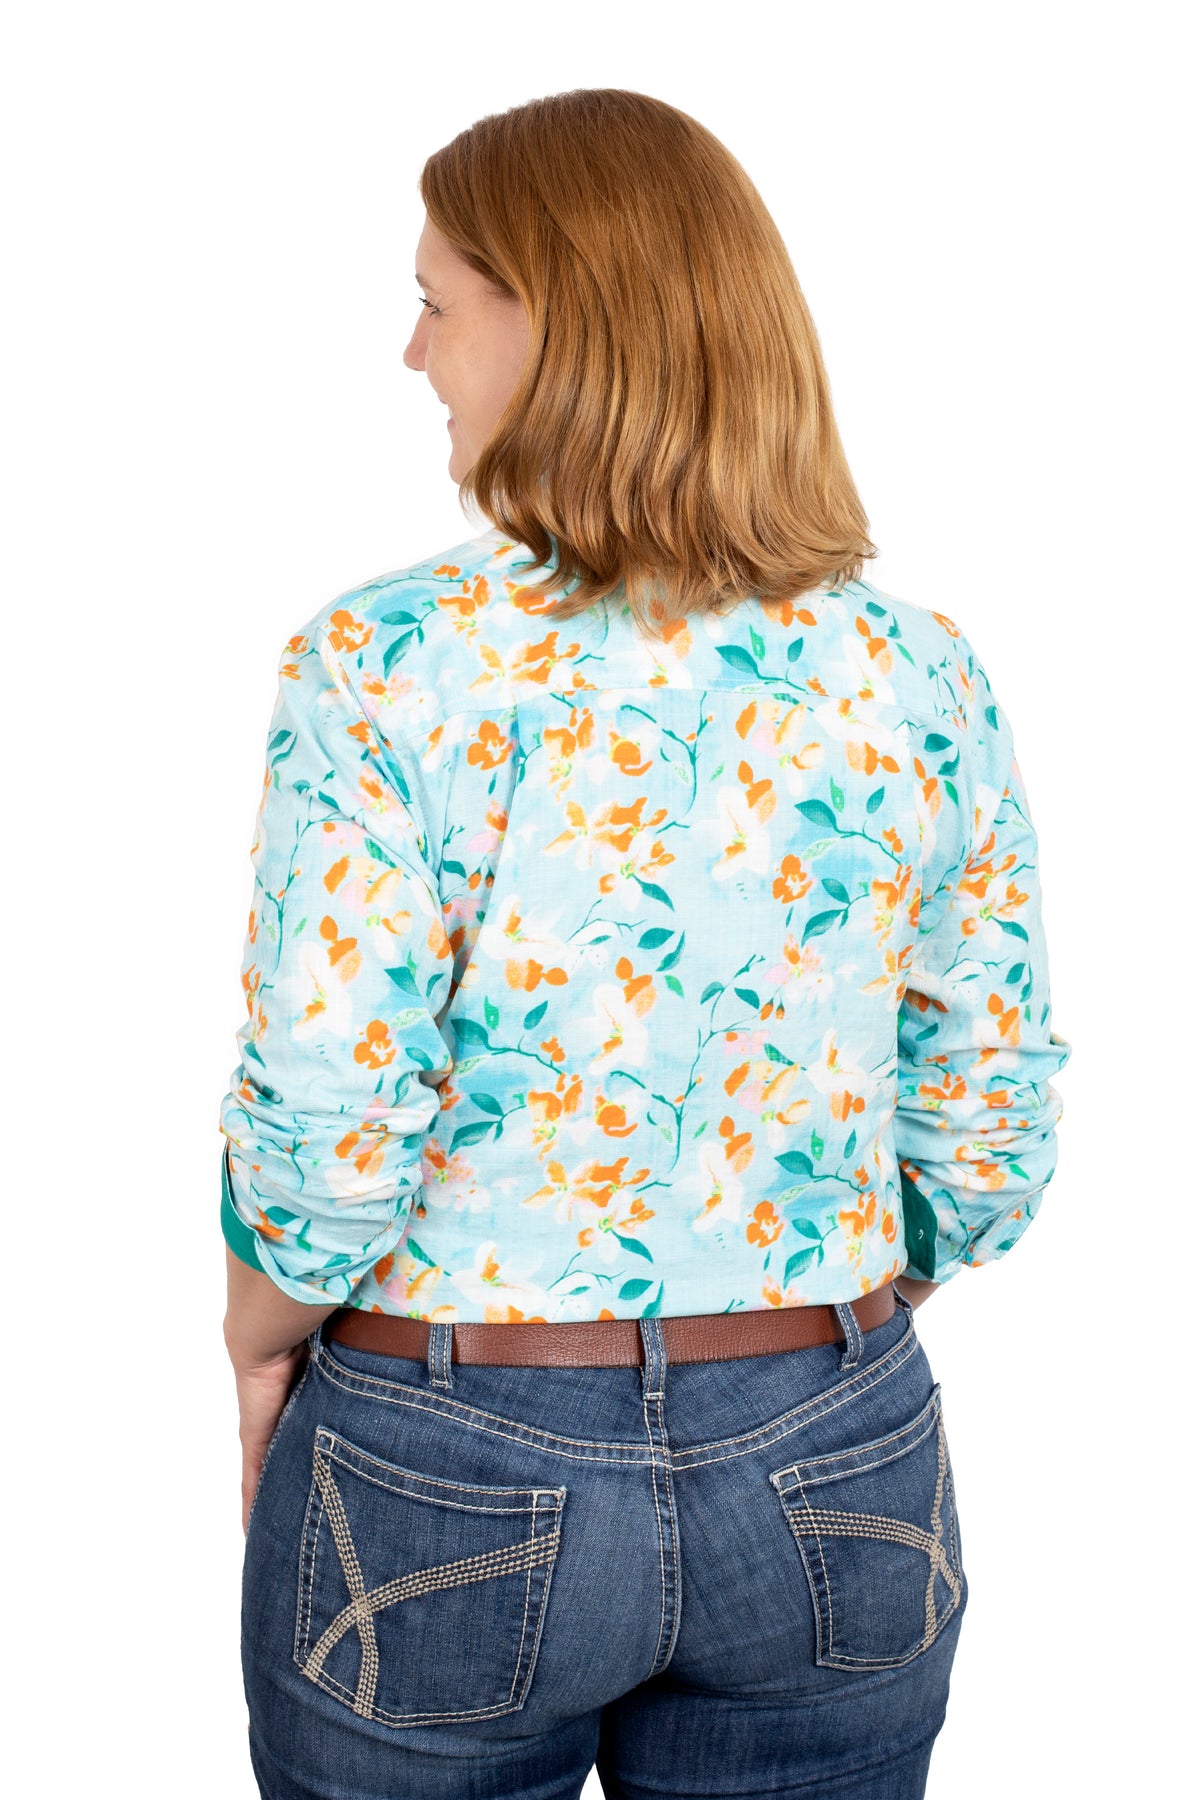 Just Country Womens Abbey Full Button Shirt - Sky Citrus Flower